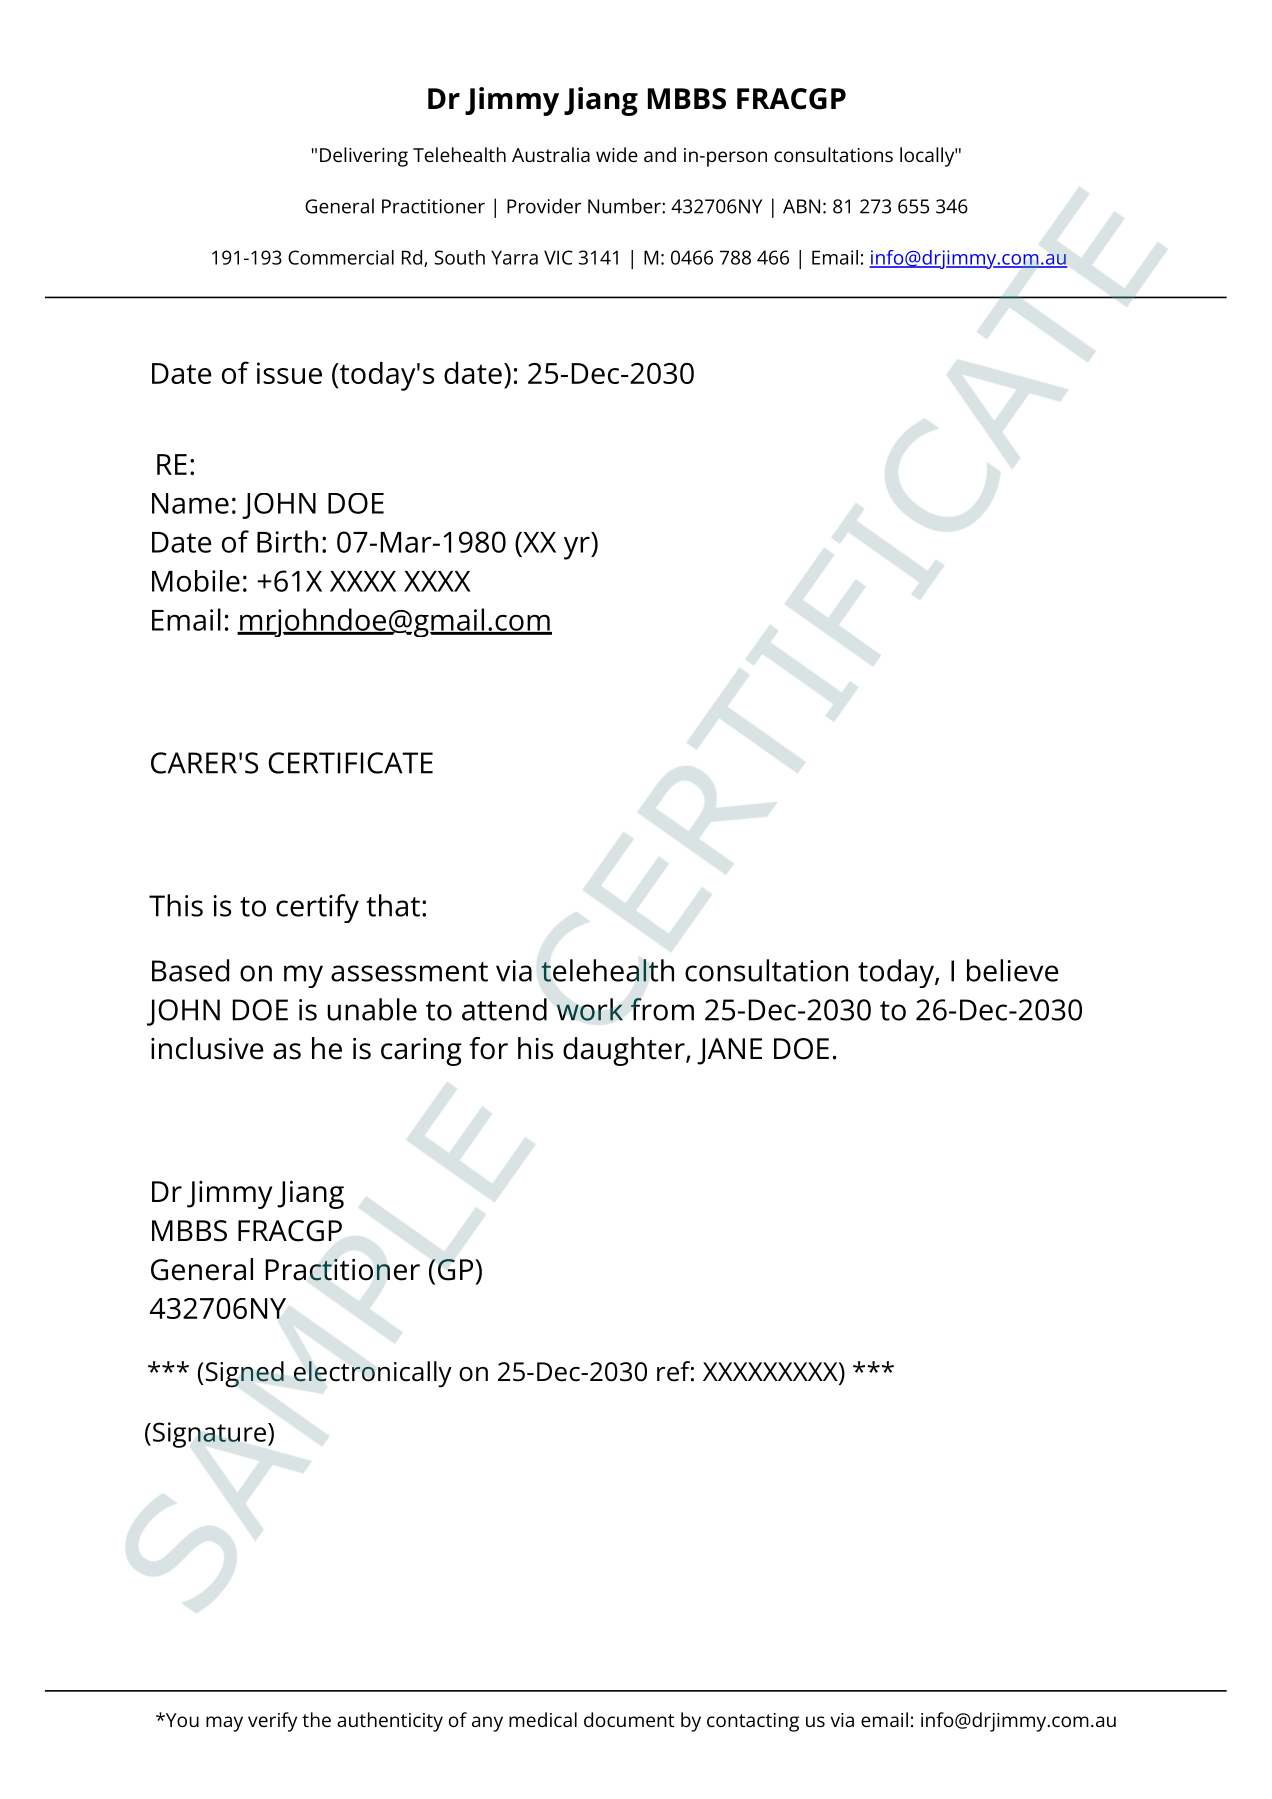 A sample of a Carer's Certificate issued by Dr Jimmy